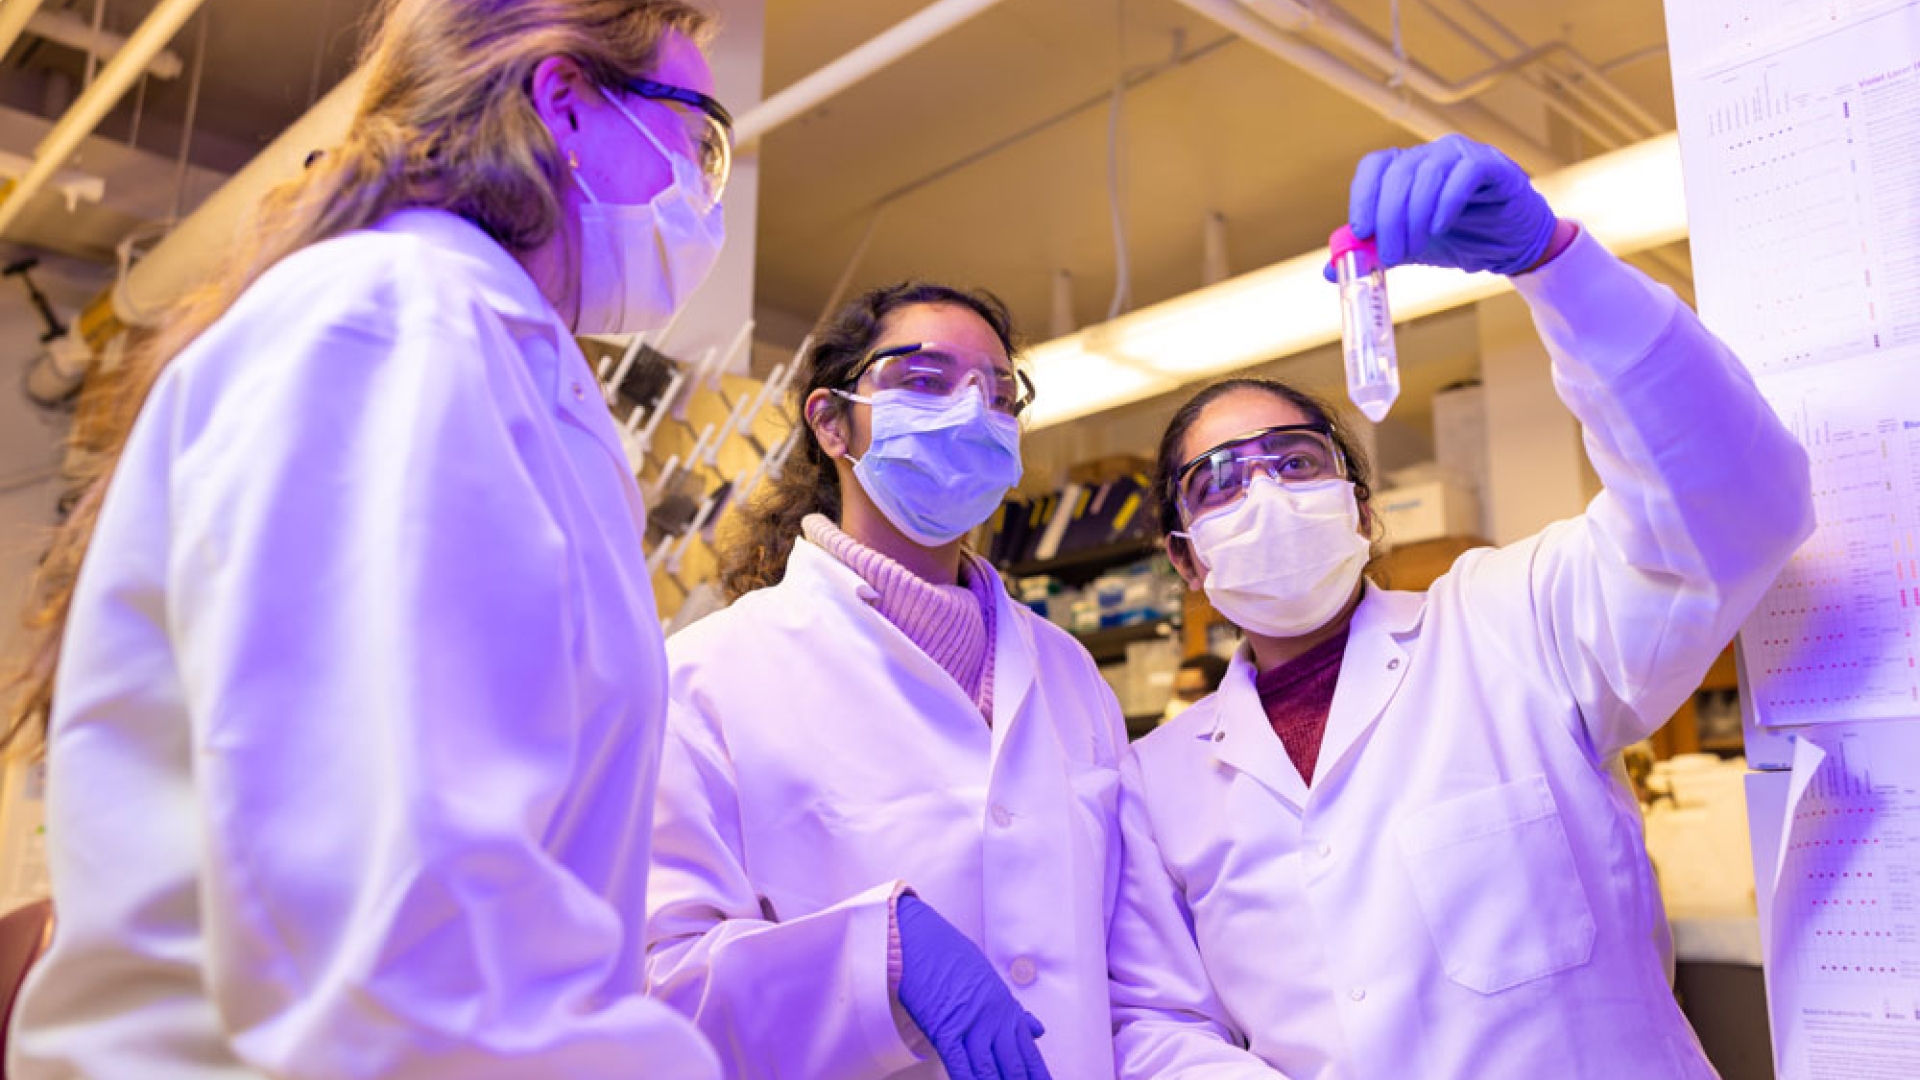 Three members of the Raghavan lab team examine the contents of a tube